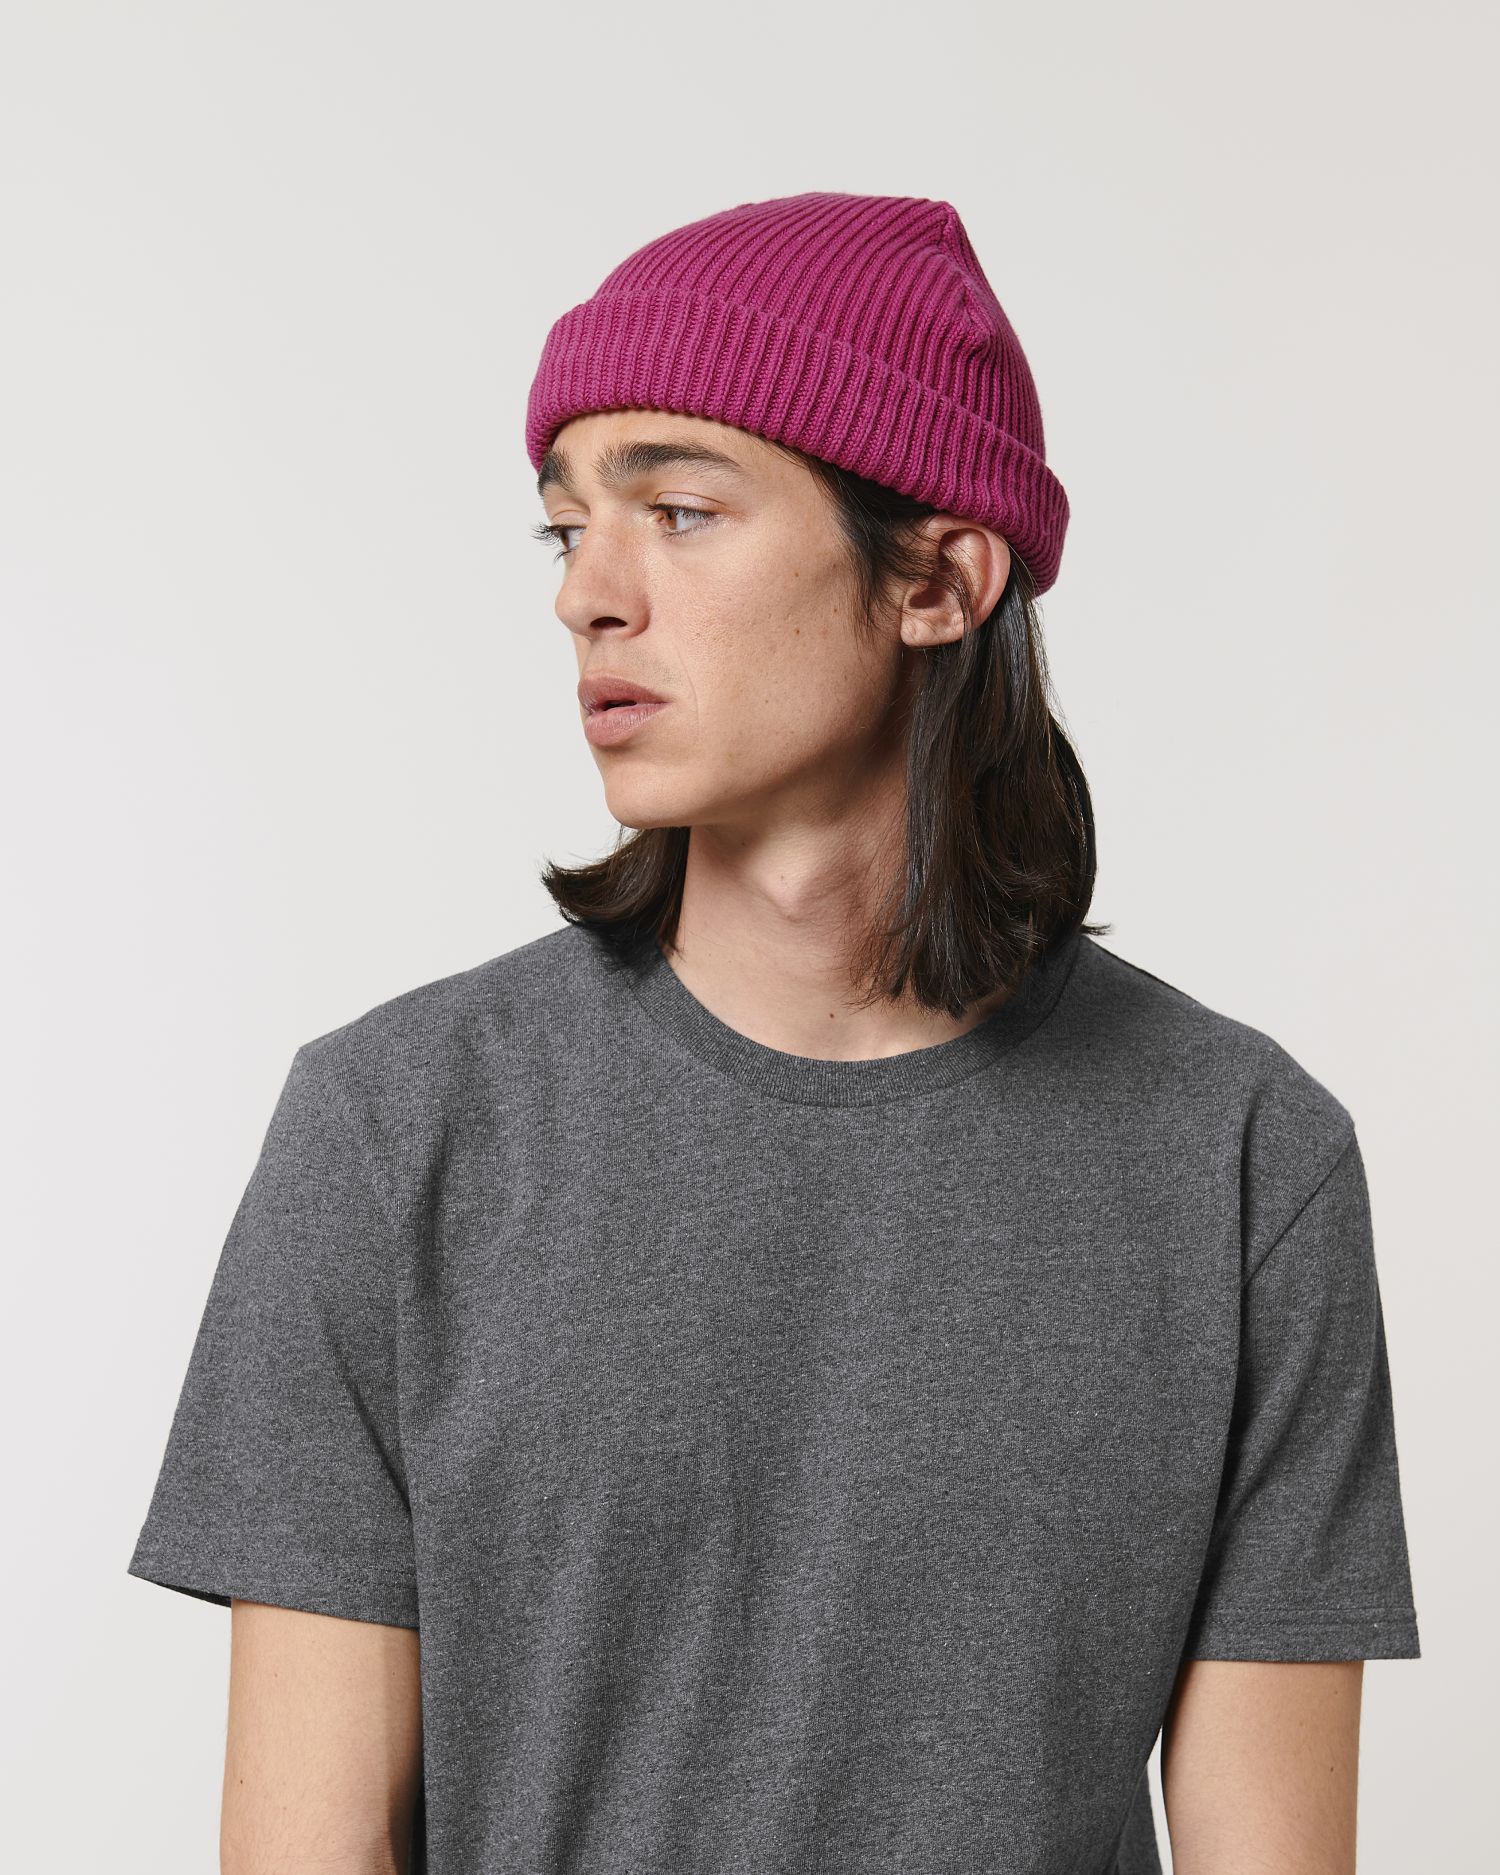  Fisherman Beanie in Farbe Orchid Flower